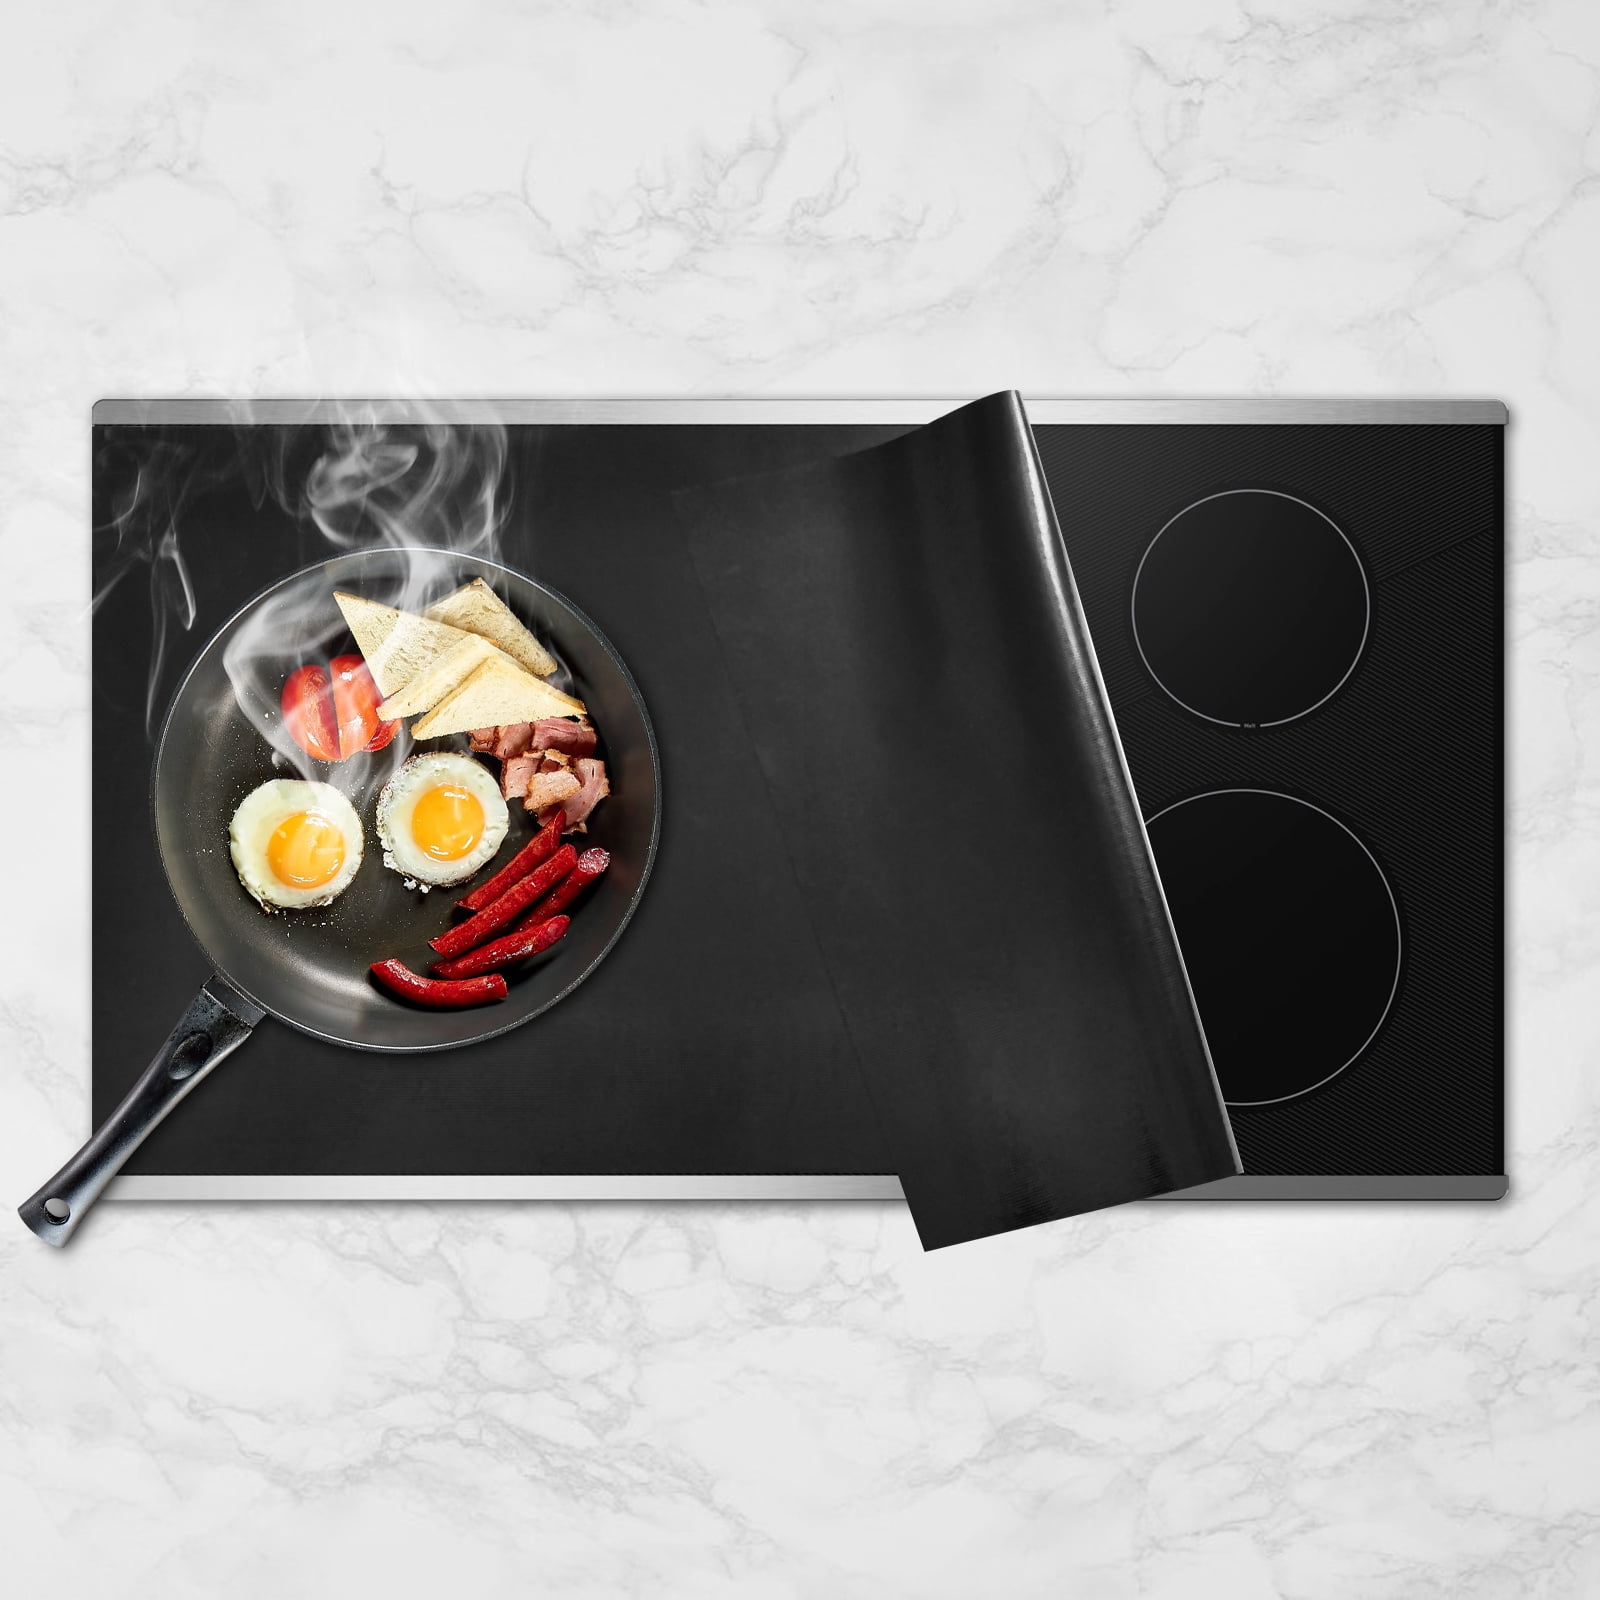 Few Stocks Left ] K-ART INDUCTION COOKTOP Protective Cover